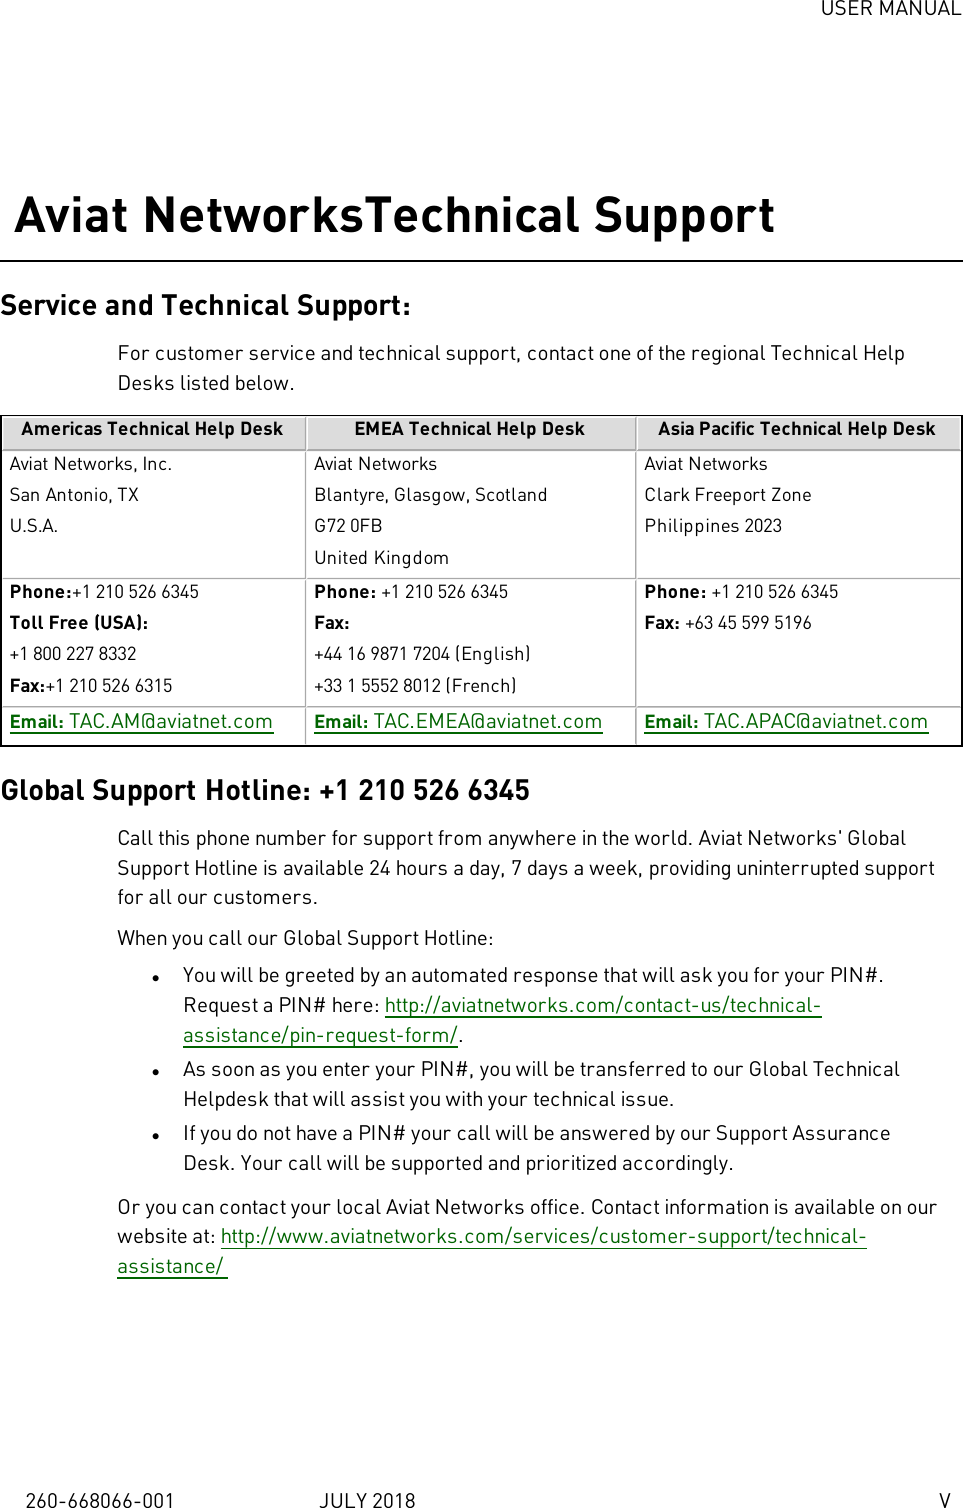 USER MANUAL260-668066-001 JULY 2018 VAviat NetworksTechnical SupportService and Technical Support:For customer service and technical support, contact one of the regional Technical HelpDesks listed below.Americas Technical Help Desk EMEA Technical Help Desk Asia Pacific Technical Help DeskAviat Networks, Inc.San Antonio, TXU.S.A.Aviat NetworksBlantyre, Glasgow, ScotlandG72 0FBUnited KingdomAviat NetworksClark Freeport ZonePhilippines 2023Phone:+1 210 526 6345Toll Free (USA):+1 800 227 8332Fax:+1 210 526 6315Phone: +1 210 526 6345Fax:+44 16 9871 7204 (English)+33 1 5552 8012 (French)Phone: +1 210 526 6345Fax: +63 45 599 5196Email: TAC.AM@aviatnet.com Email: TAC.EMEA@aviatnet.com Email: TAC.APAC@aviatnet.comGlobal Support Hotline: +1 210 526 6345Call this phone number for support from anywhere in the world. Aviat Networks&apos; GlobalSupport Hotline is available 24 hours a day, 7 days a week, providing uninterrupted supportfor all our customers.When you call our Global Support Hotline:lYou will be greeted by an automated response that will ask you for your PIN#.Request a PIN# here: http://aviatnetworks.com/contact-us/technical-assistance/pin-request-form/.lAs soon as you enter your PIN#, you will be transferred to our Global TechnicalHelpdesk that will assist you with your technical issue.lIf you do not have a PIN# your call will be answered by our Support AssuranceDesk. Your call will be supported and prioritized accordingly.Or you can contact your local Aviat Networks office. Contact information is available on ourwebsite at: http://www.aviatnetworks.com/services/customer-support/technical-assistance/